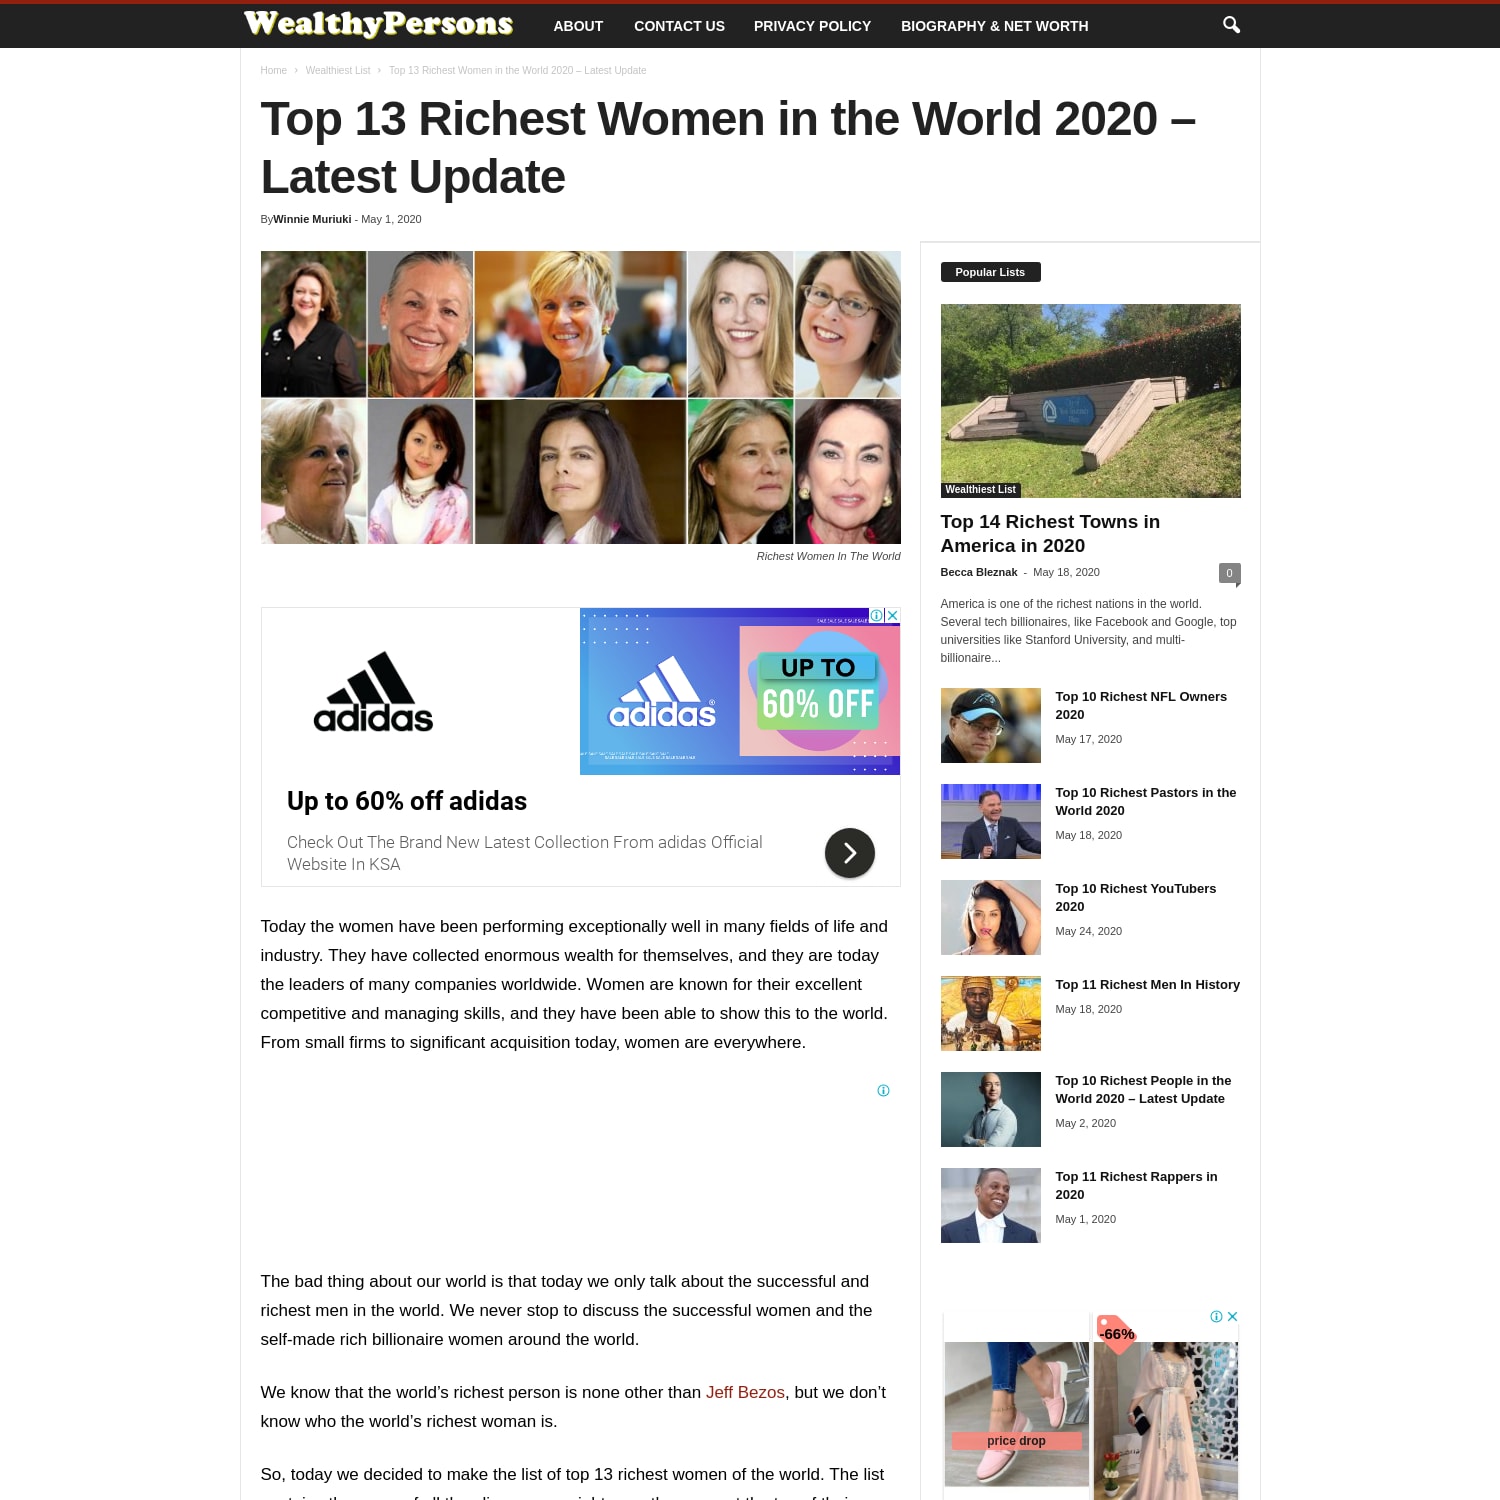 Top 10 Richest Women in the World 2020 by Net Worth